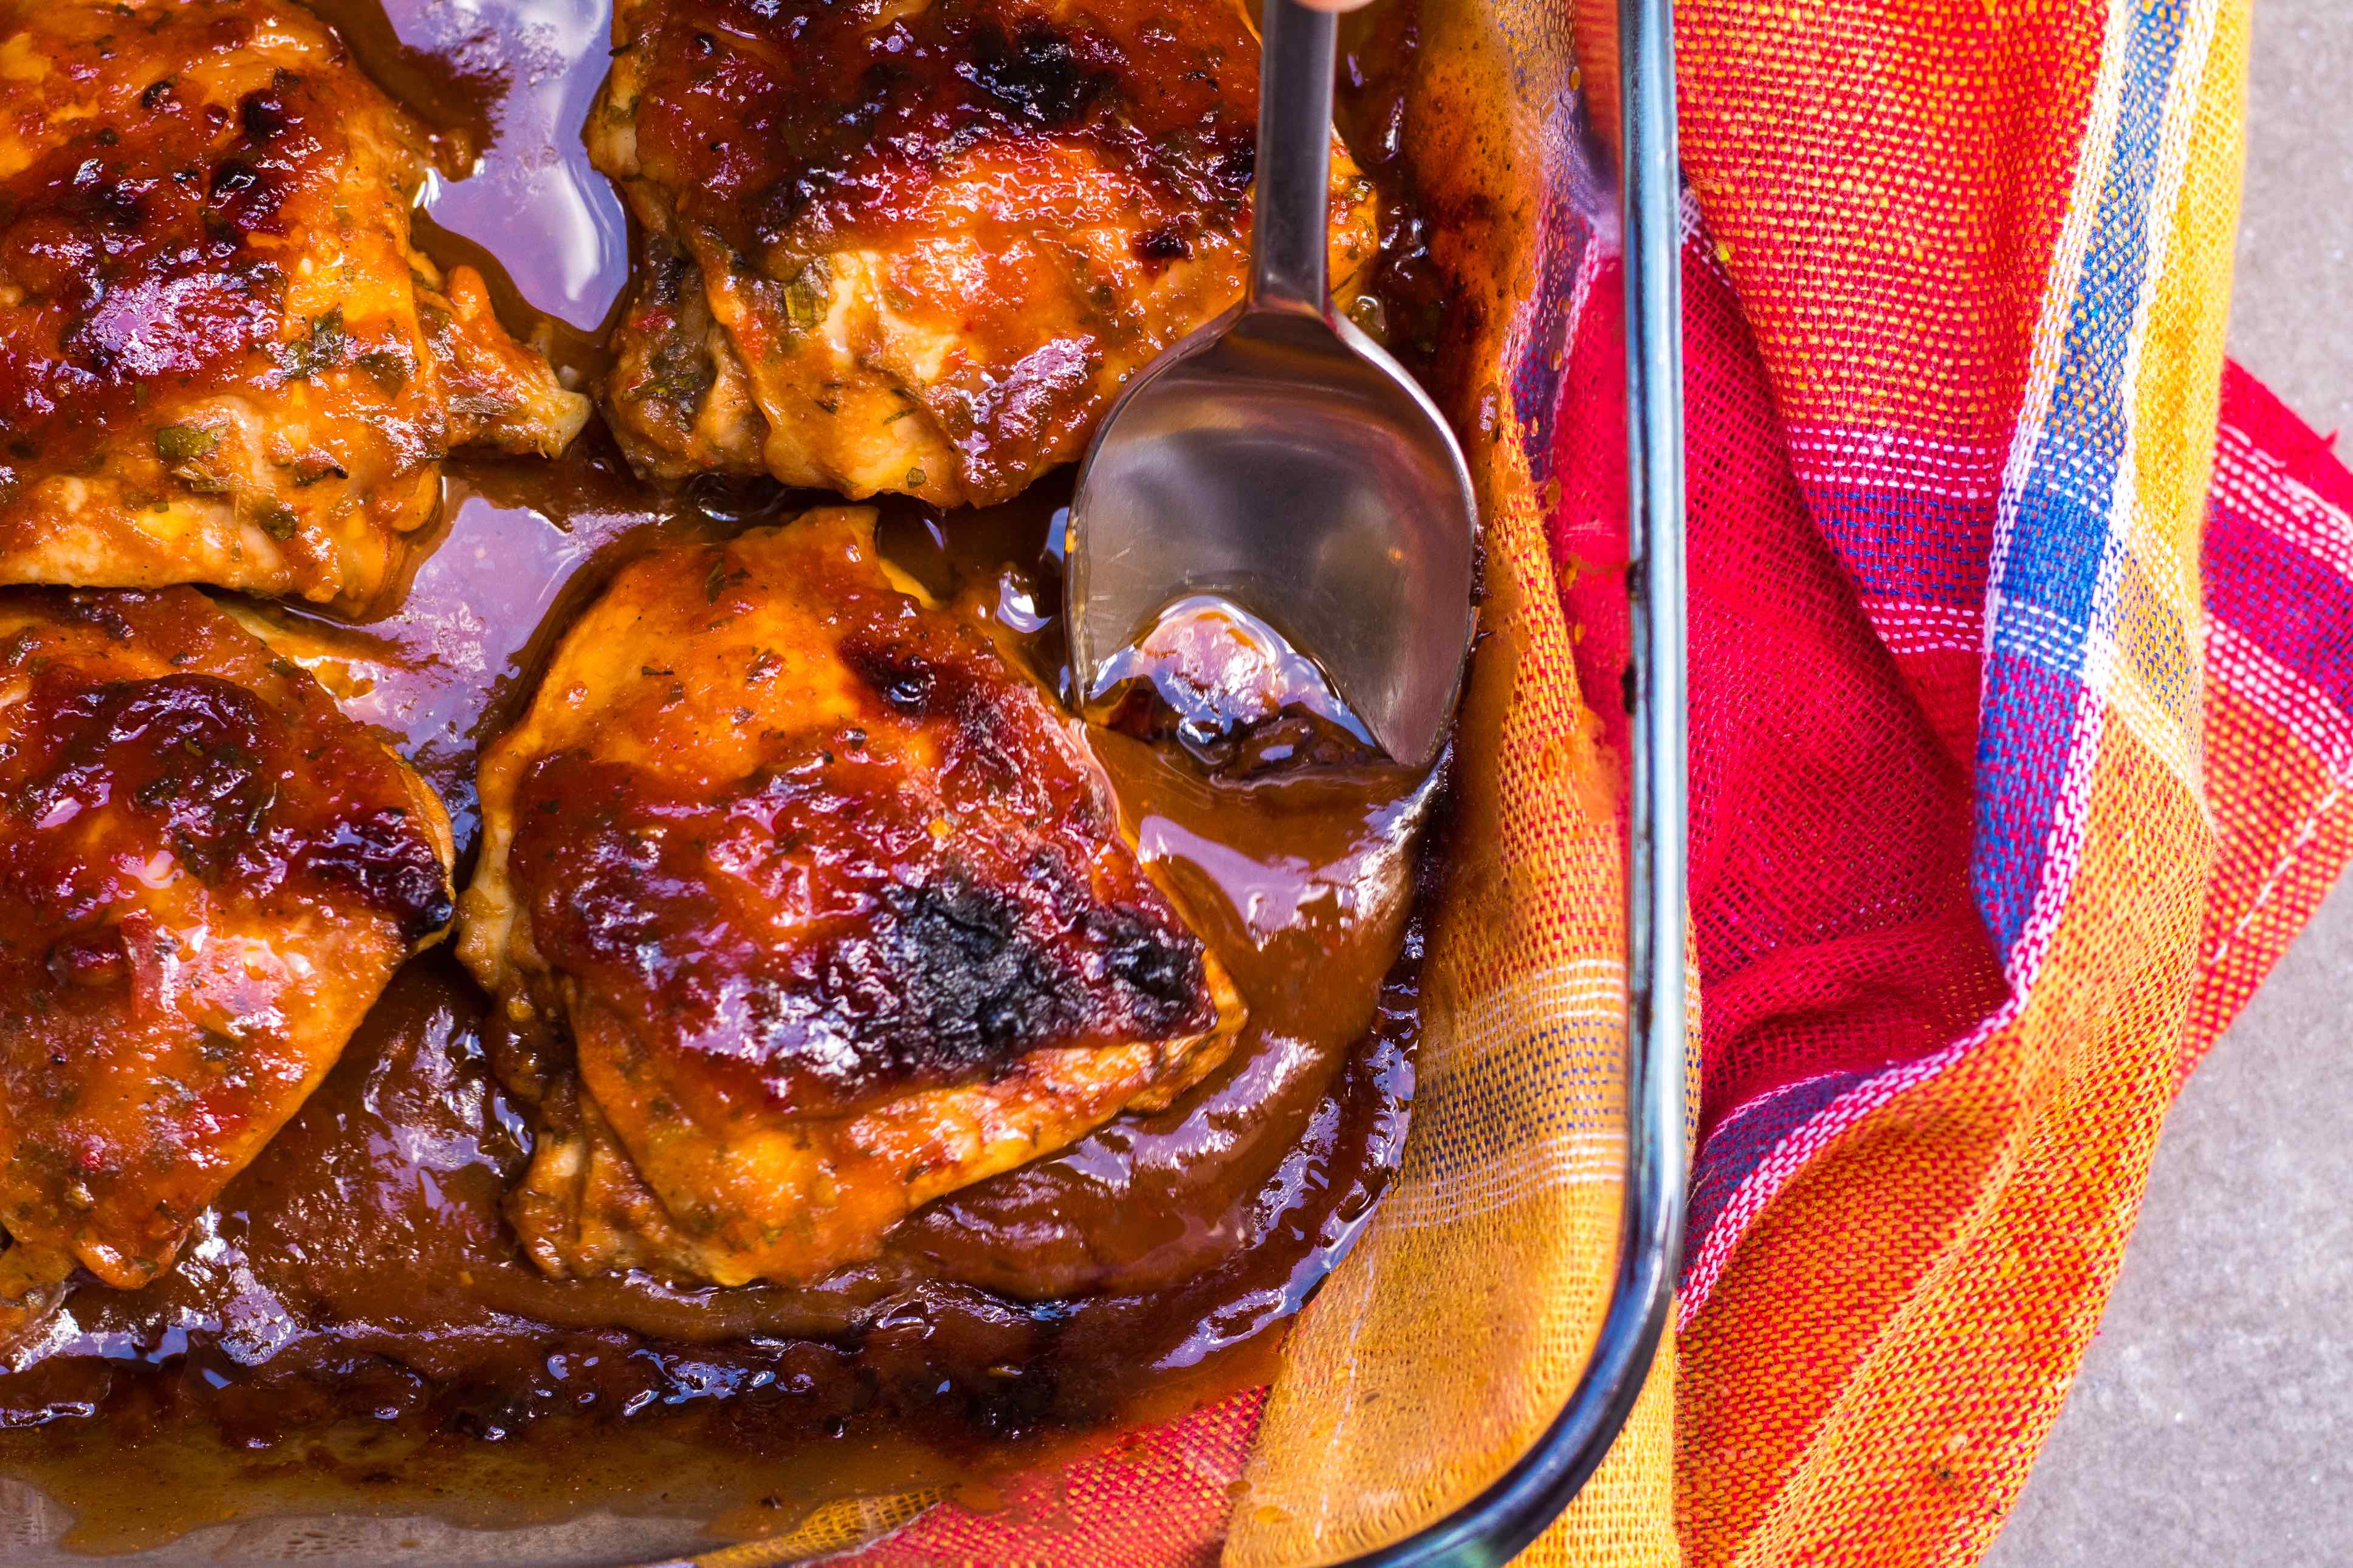 Baked BBQ chicken with homemade BBQ sauce